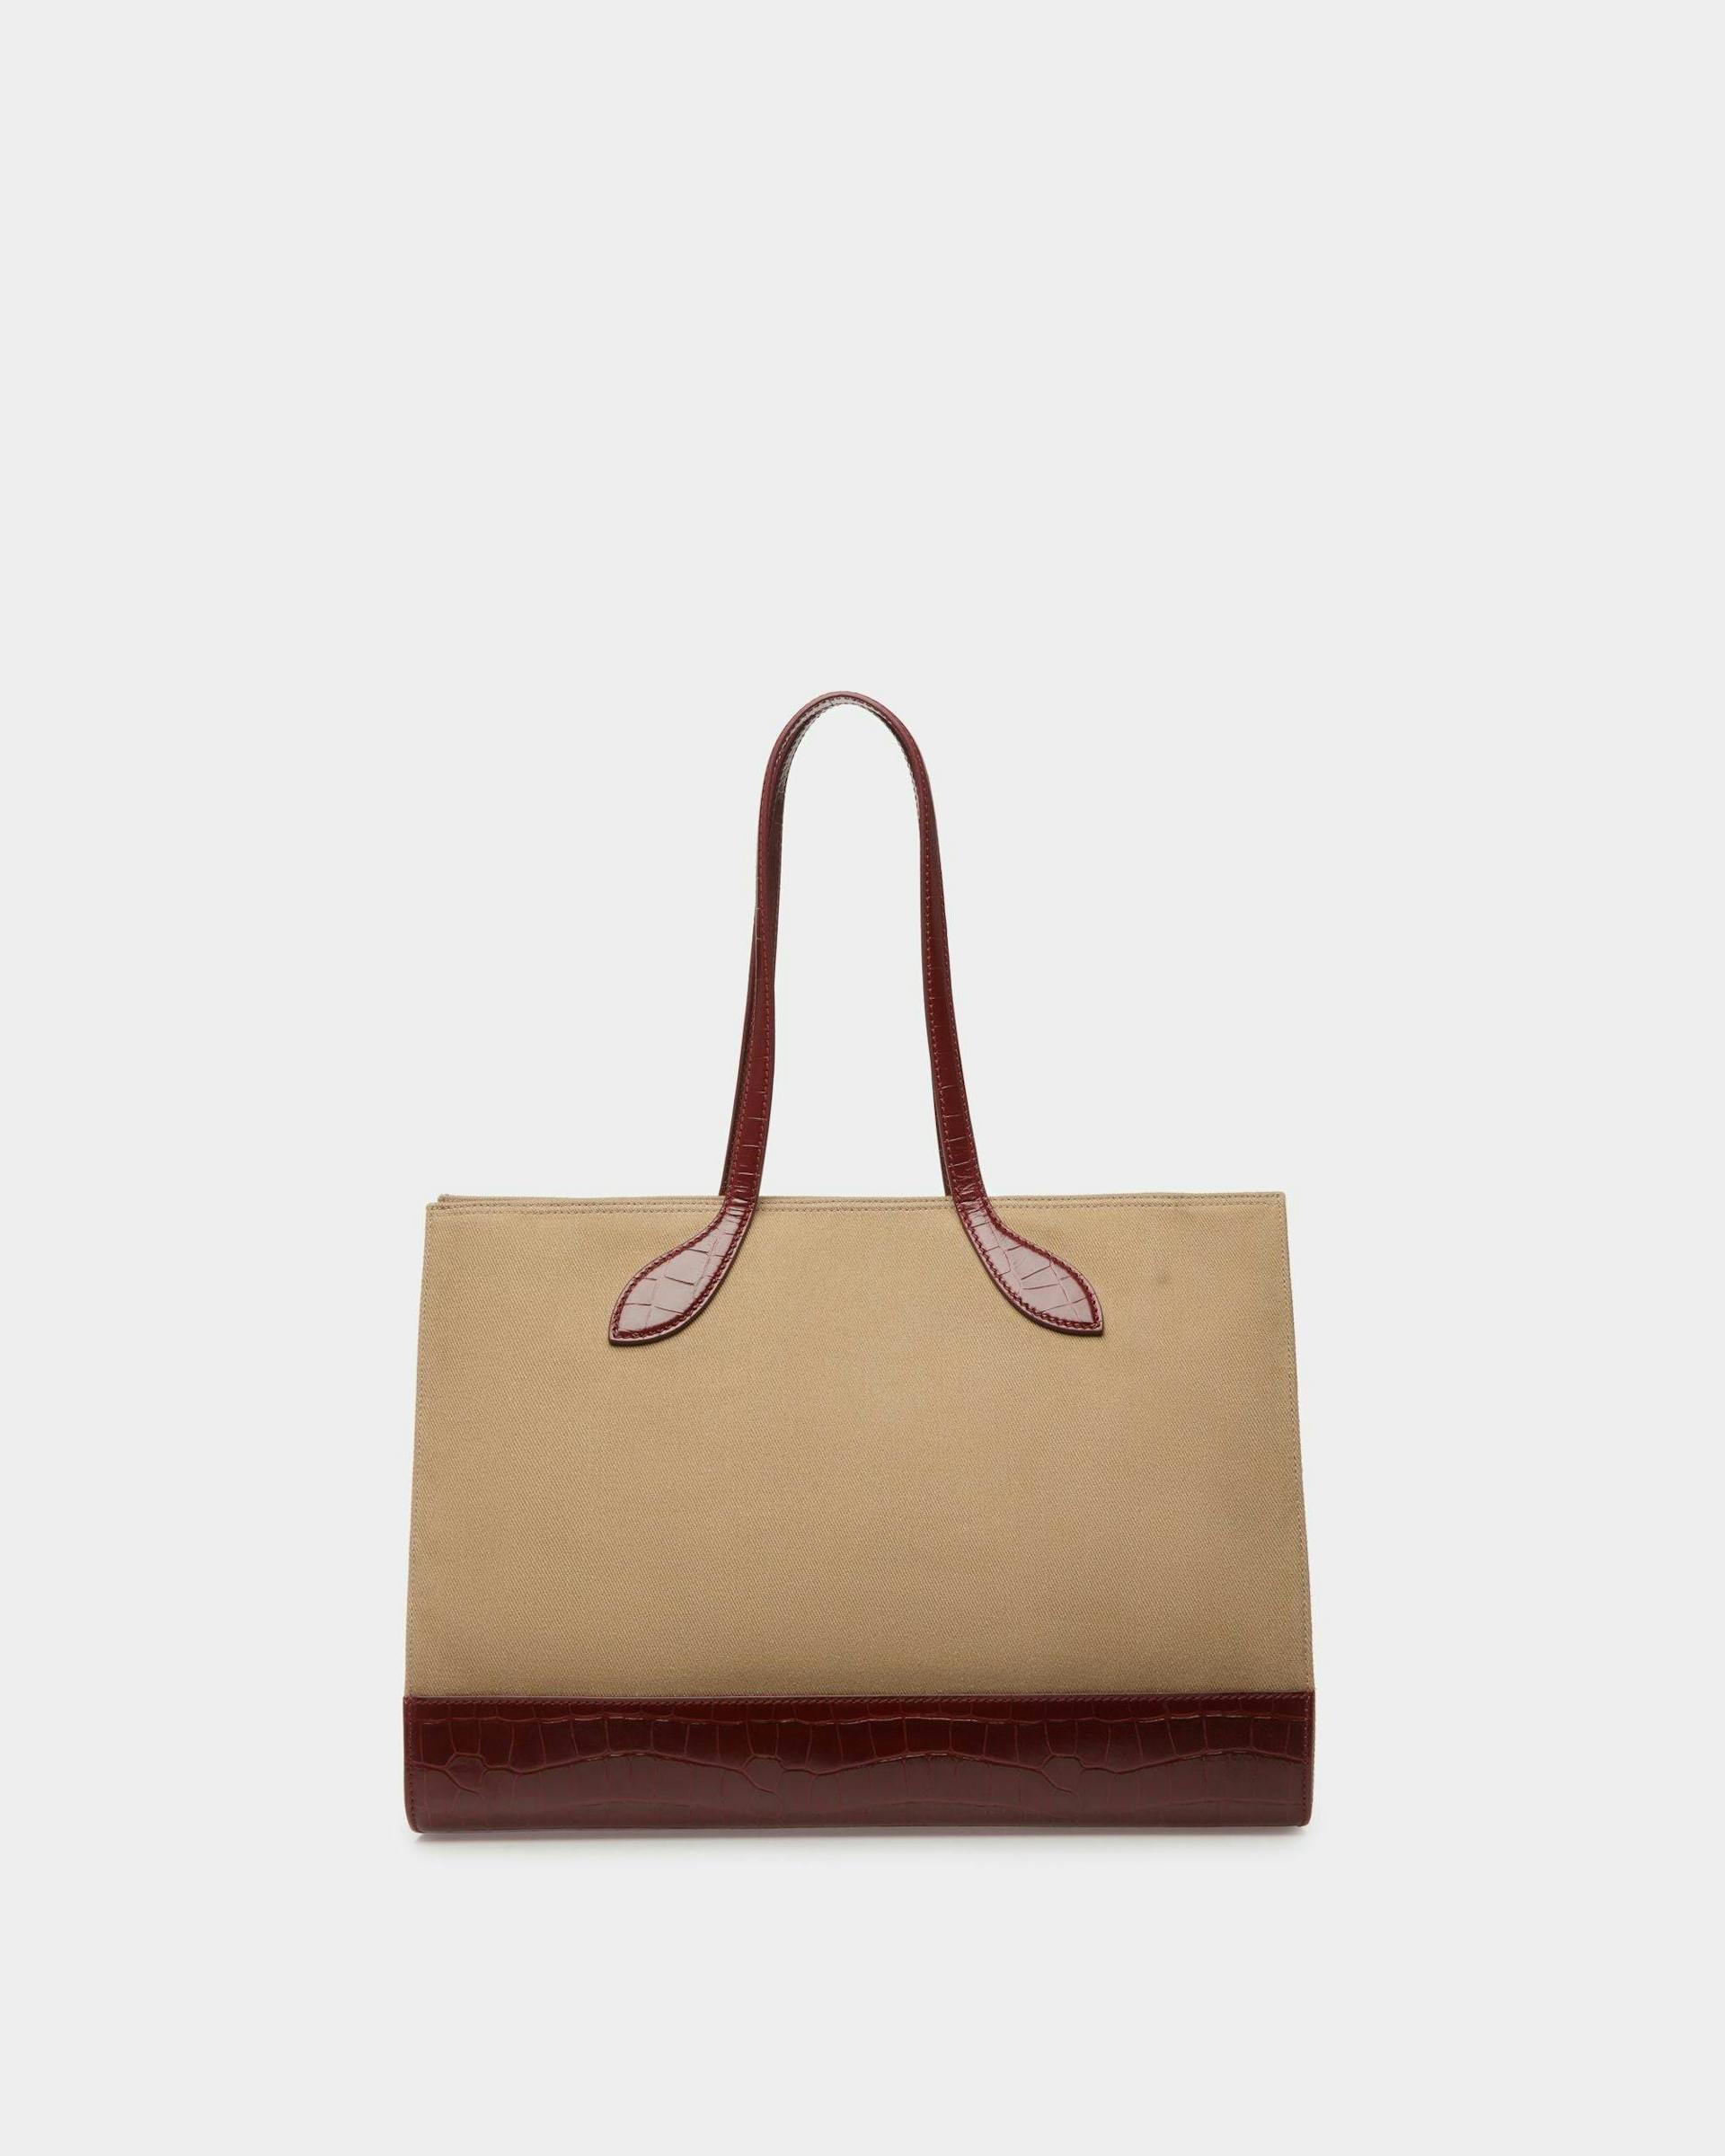 Bar Tote Bag In Sand And Burgundy Fabric - Women's - Bally - 03